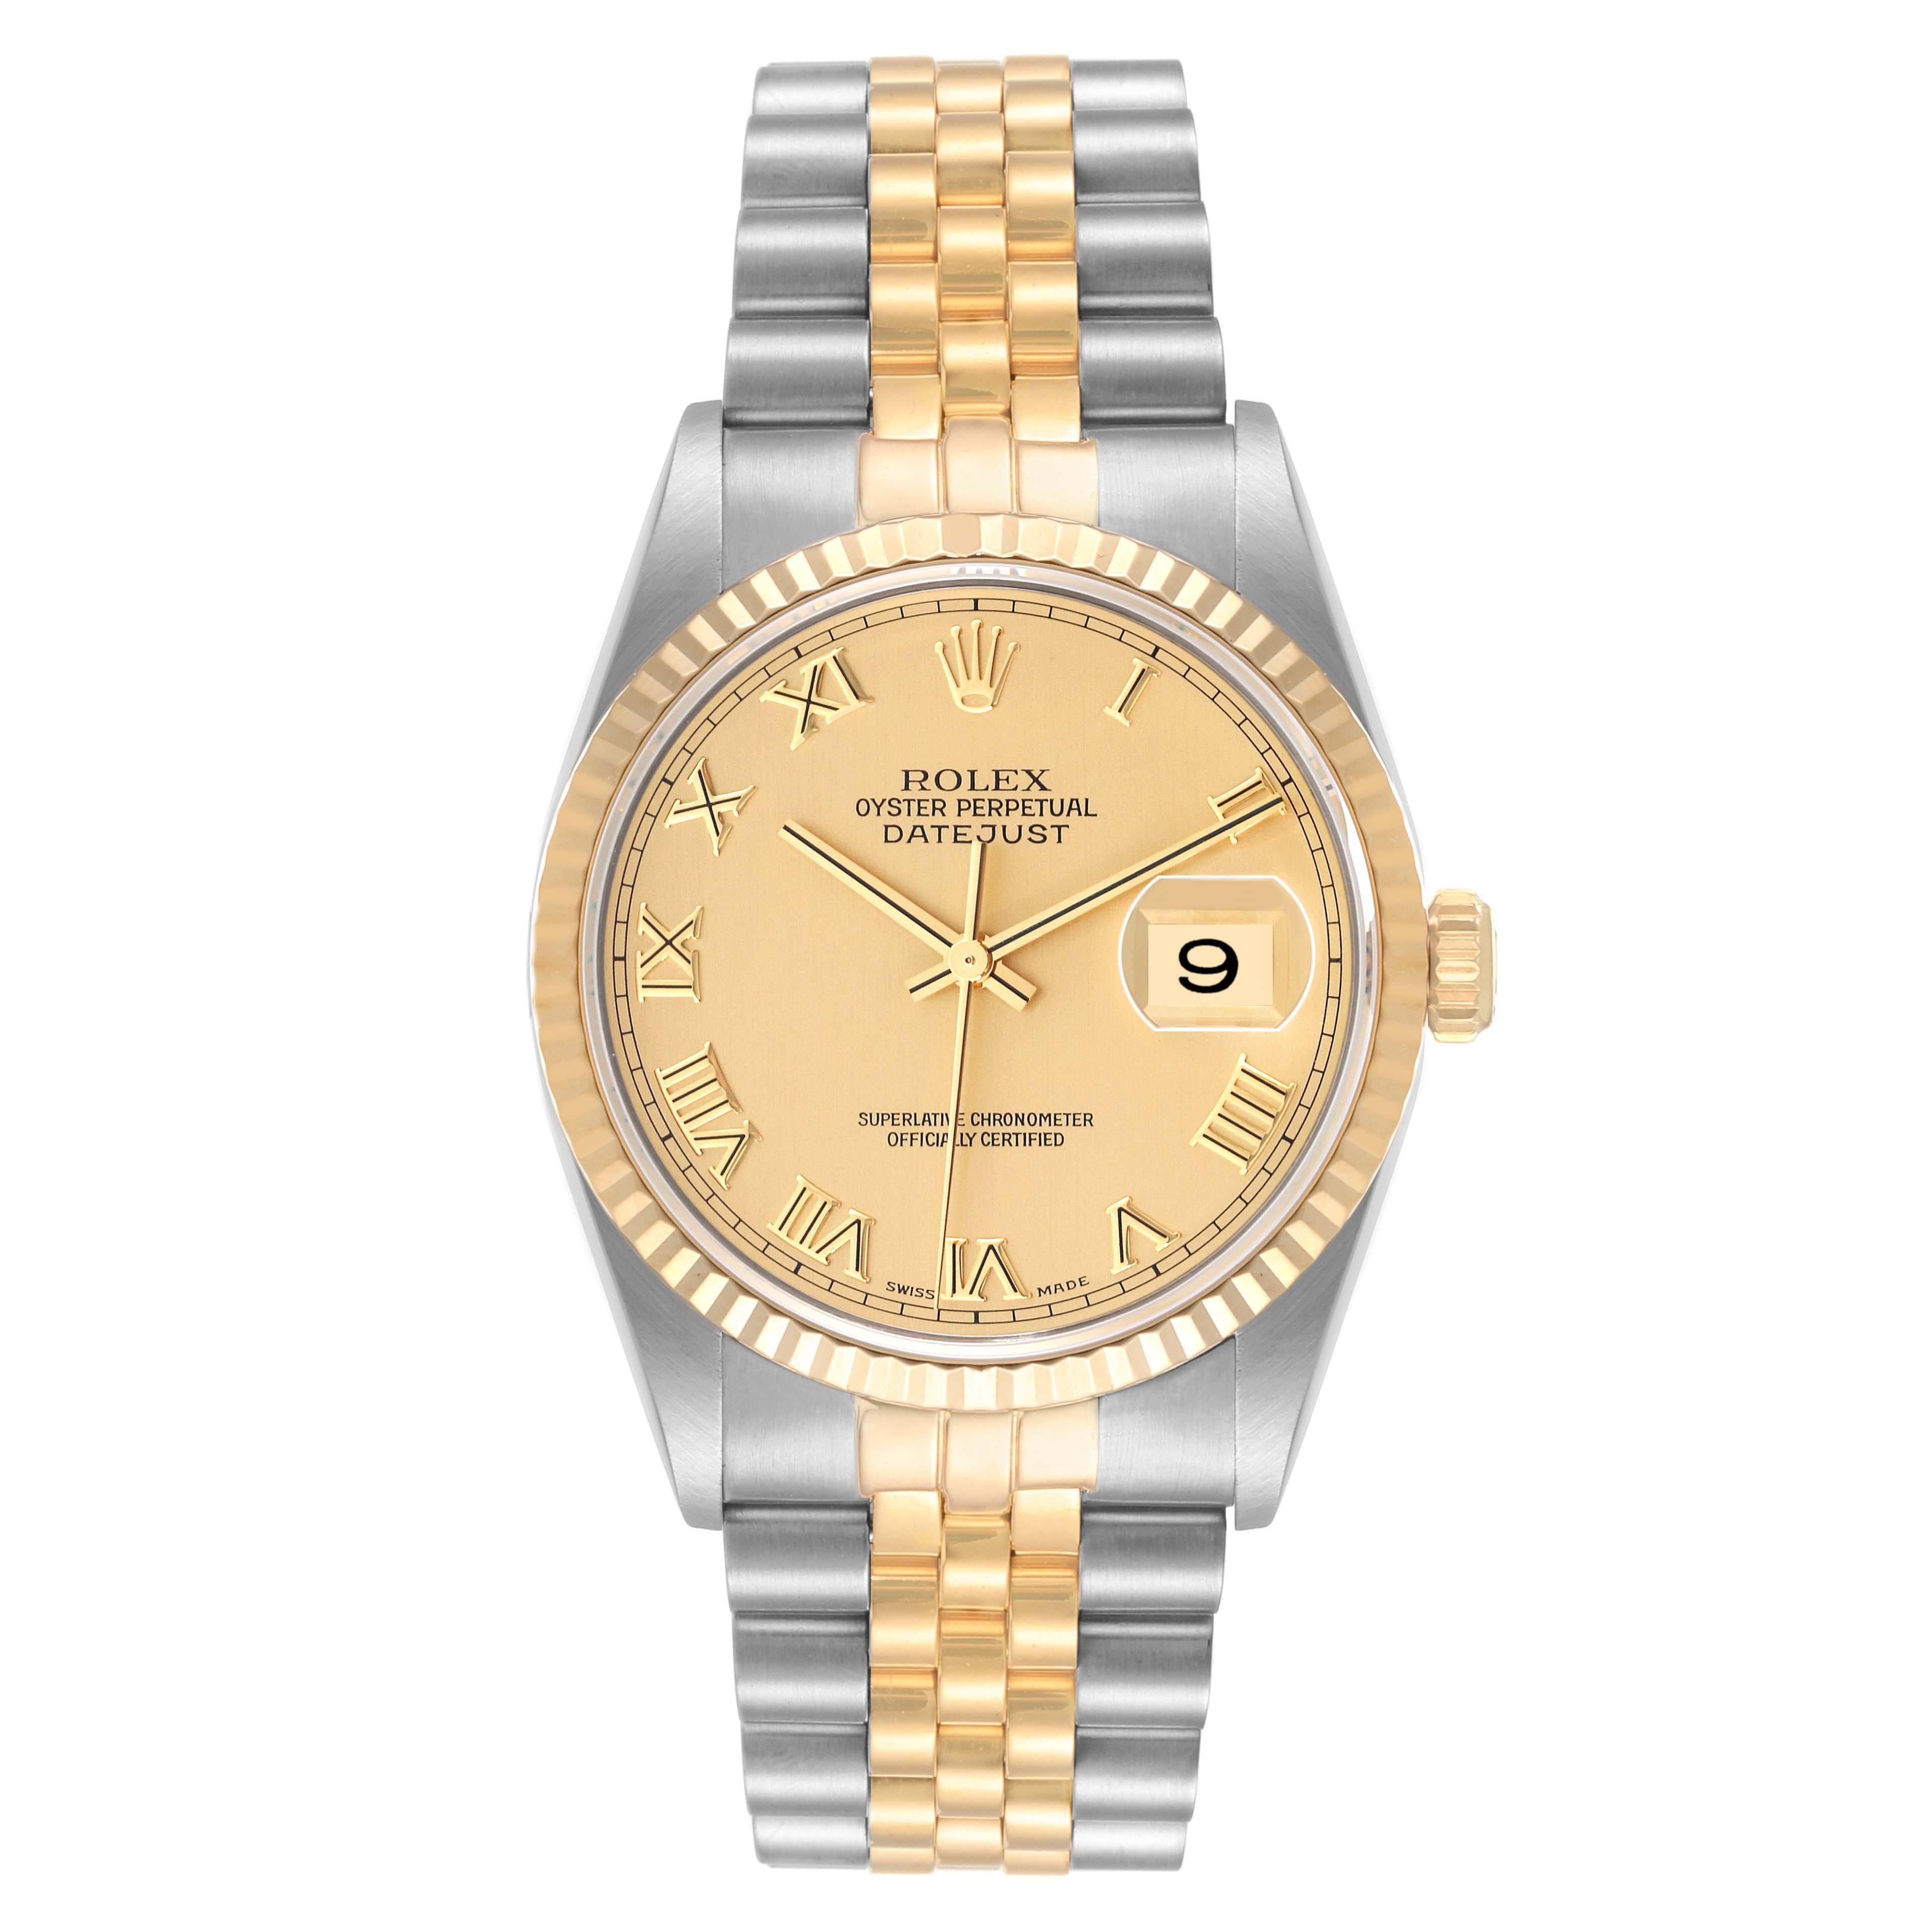 Rolex Datejust Steel Yellow Gold Champagne Dial Mens Watch 16233. Officially certified chronometer automatic self-winding movement. Stainless steel case 36.0 mm in diameter. Rolex logo on a crown. 18k yellow gold fluted bezel. Scratch resistant